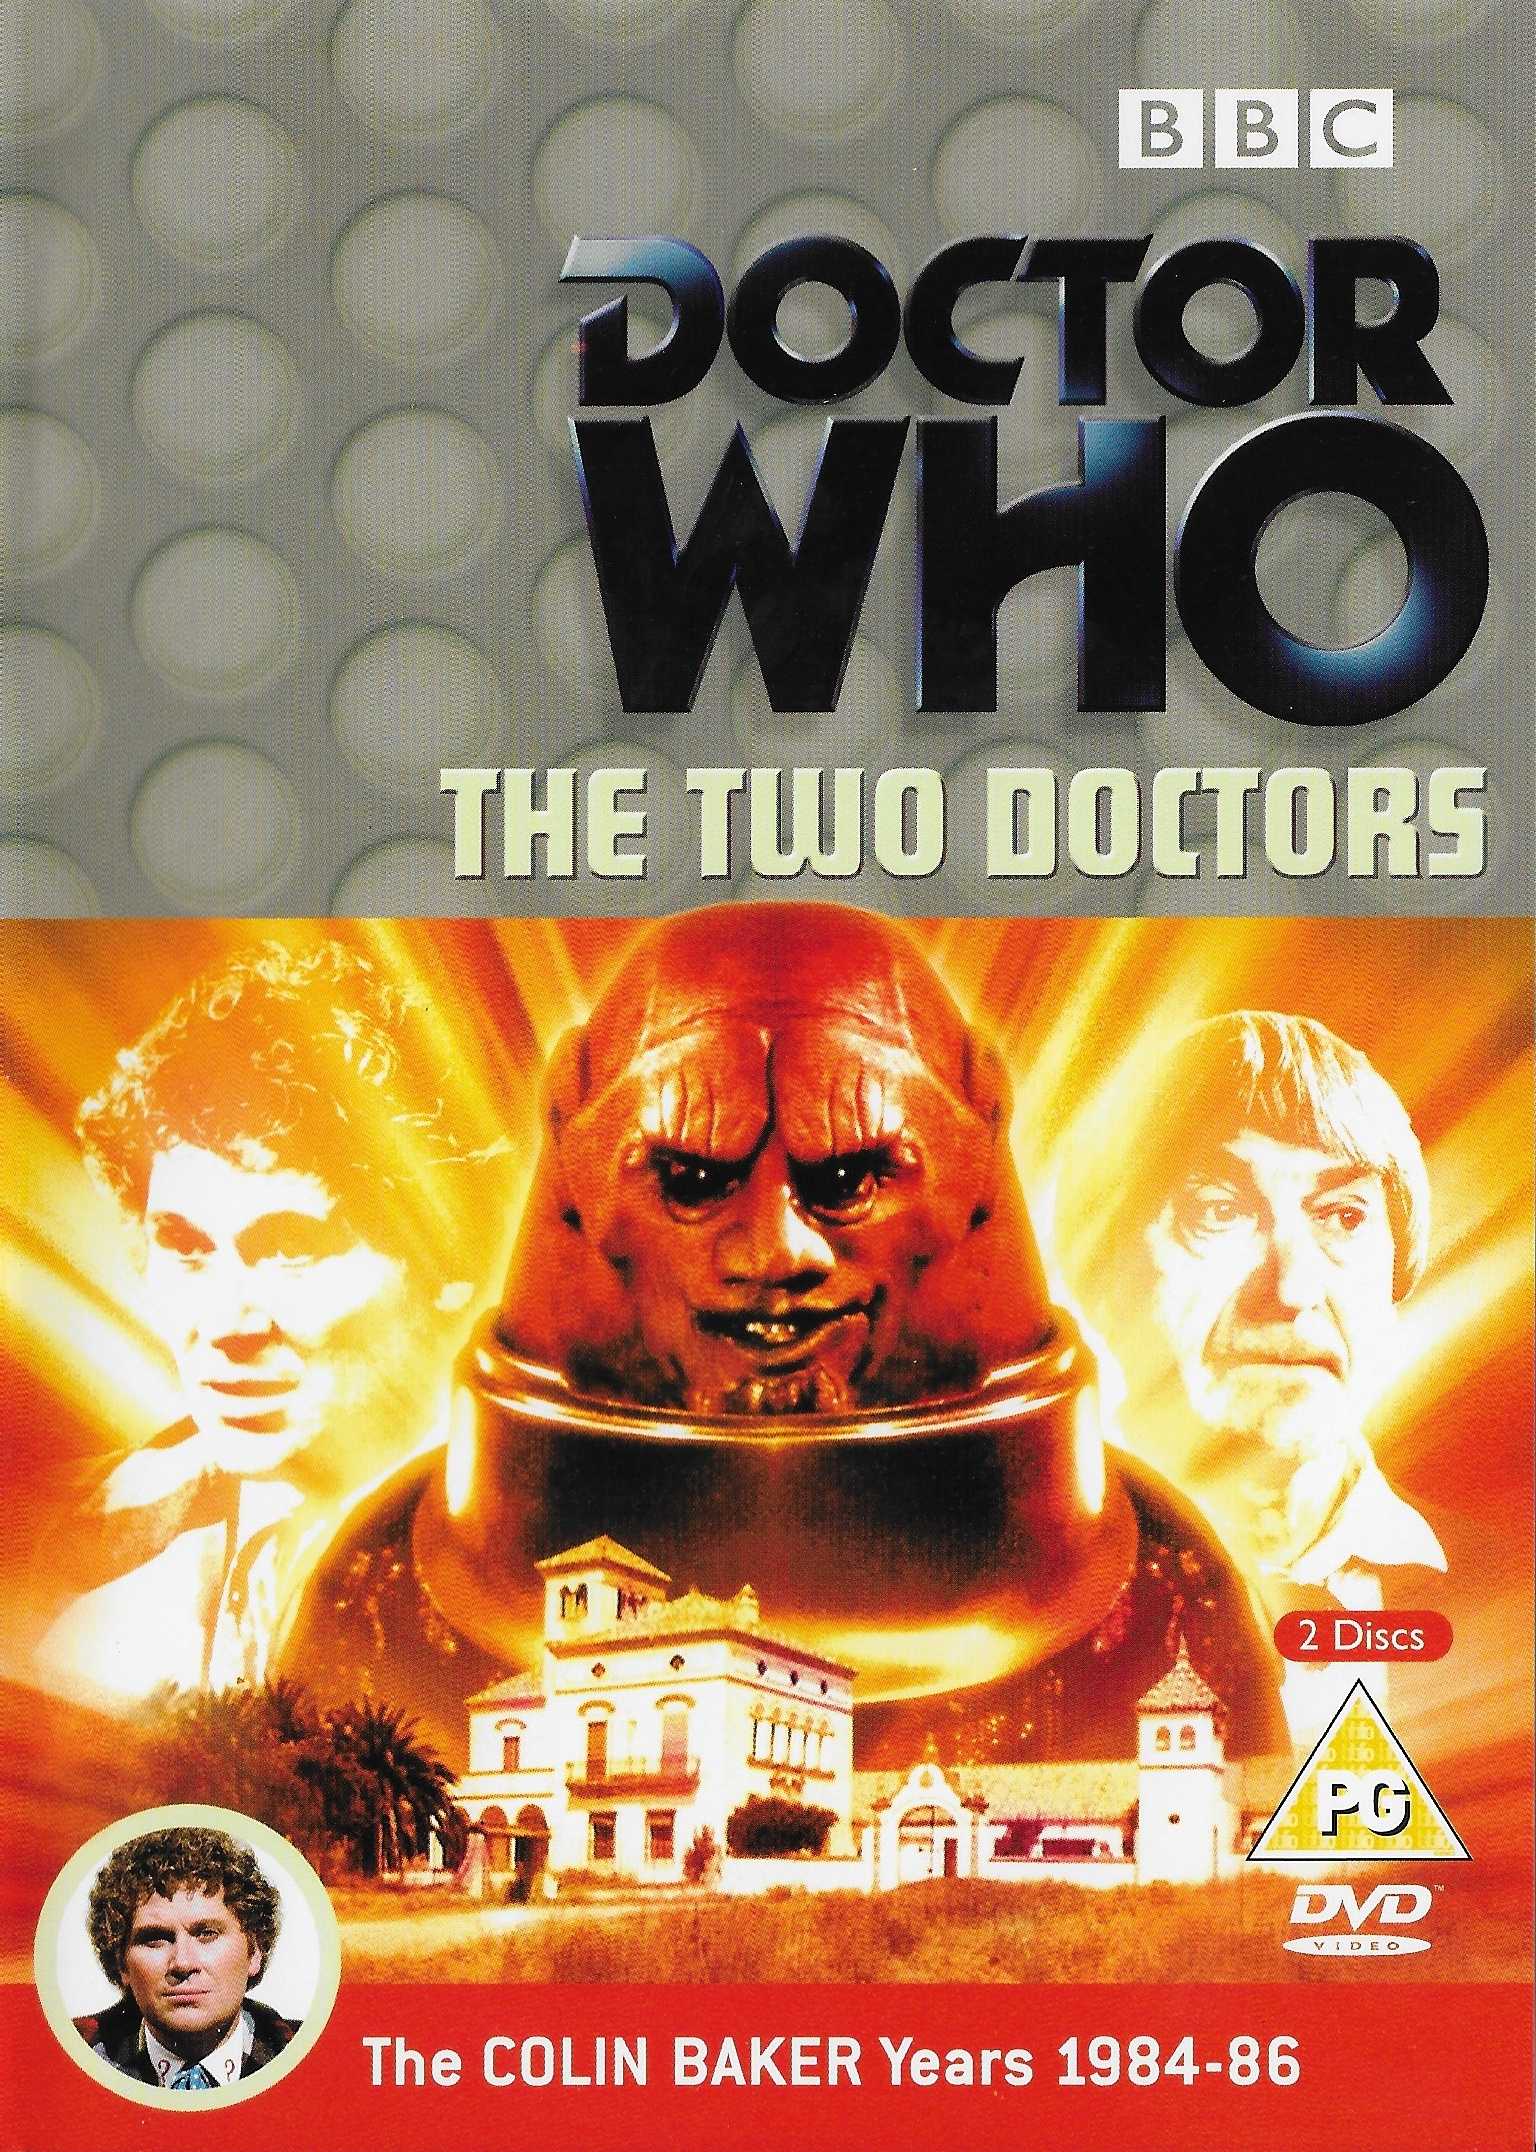 Picture of BBCDVD 1213 Doctor Who - The two doctors by artist Robert Holmes from the BBC dvds - Records and Tapes library